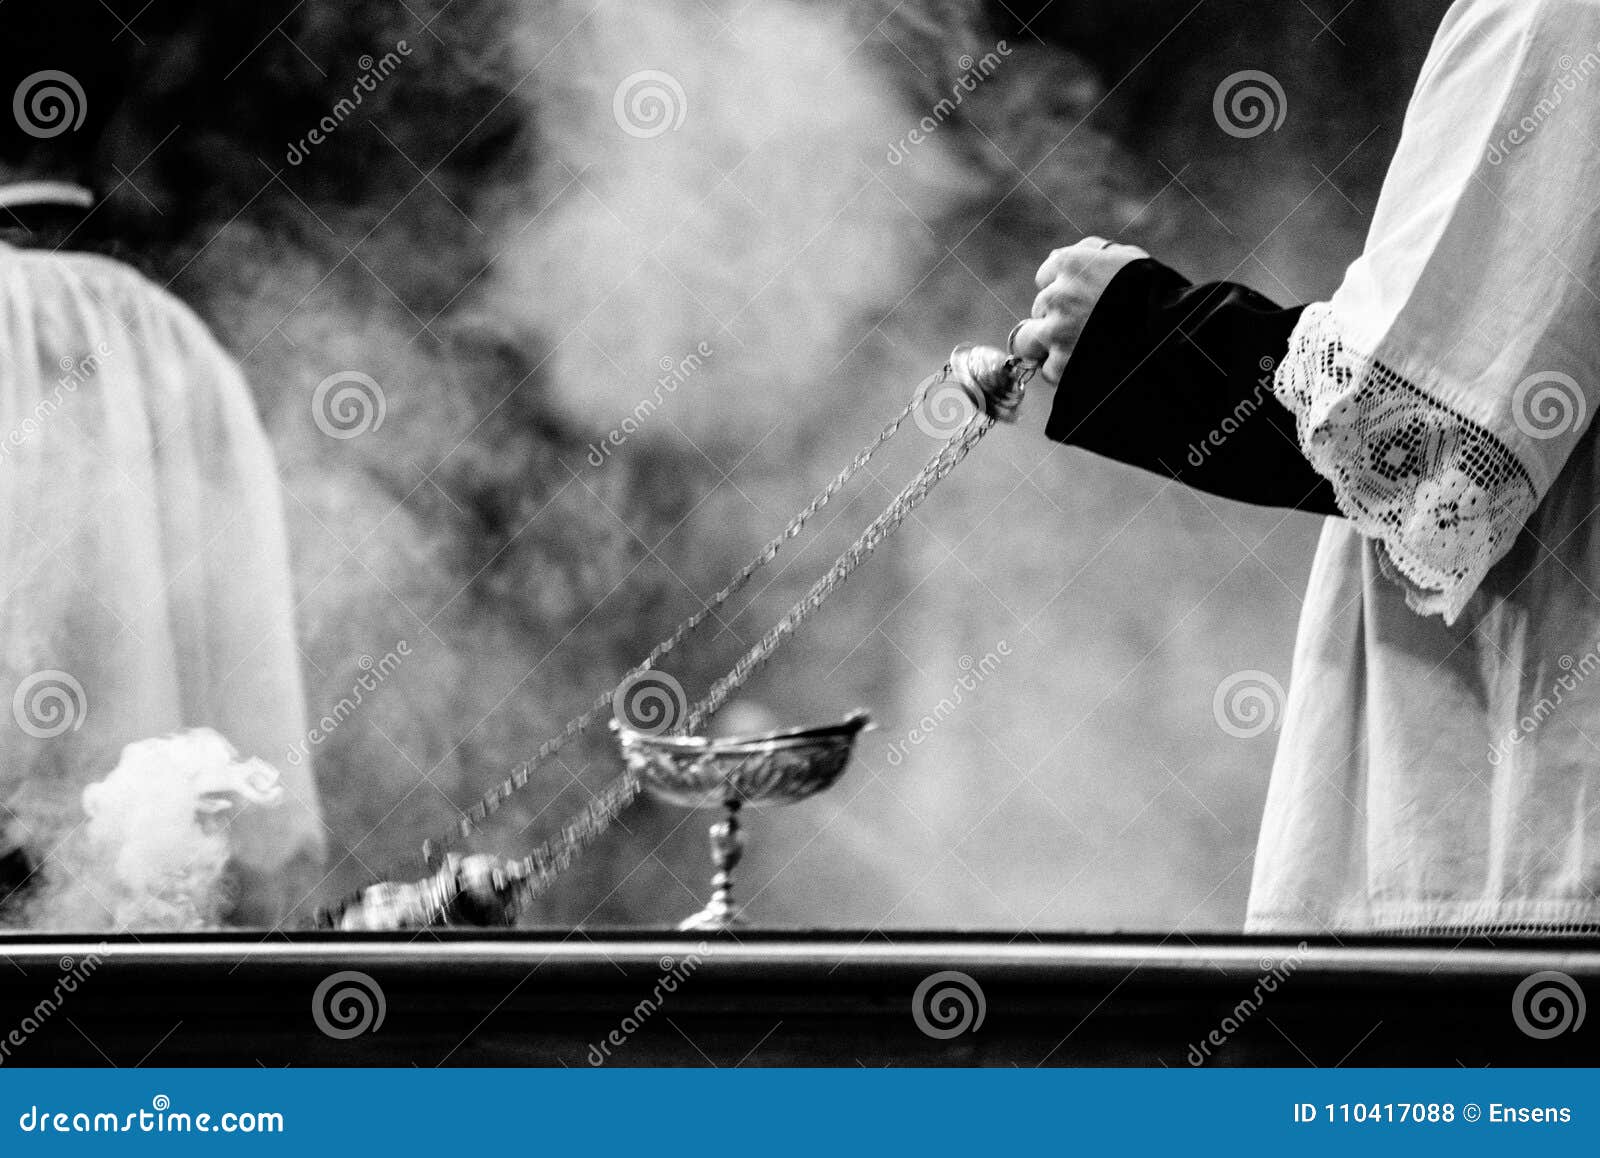 altar boy of the catholic church with thurible in his hand during a celebration